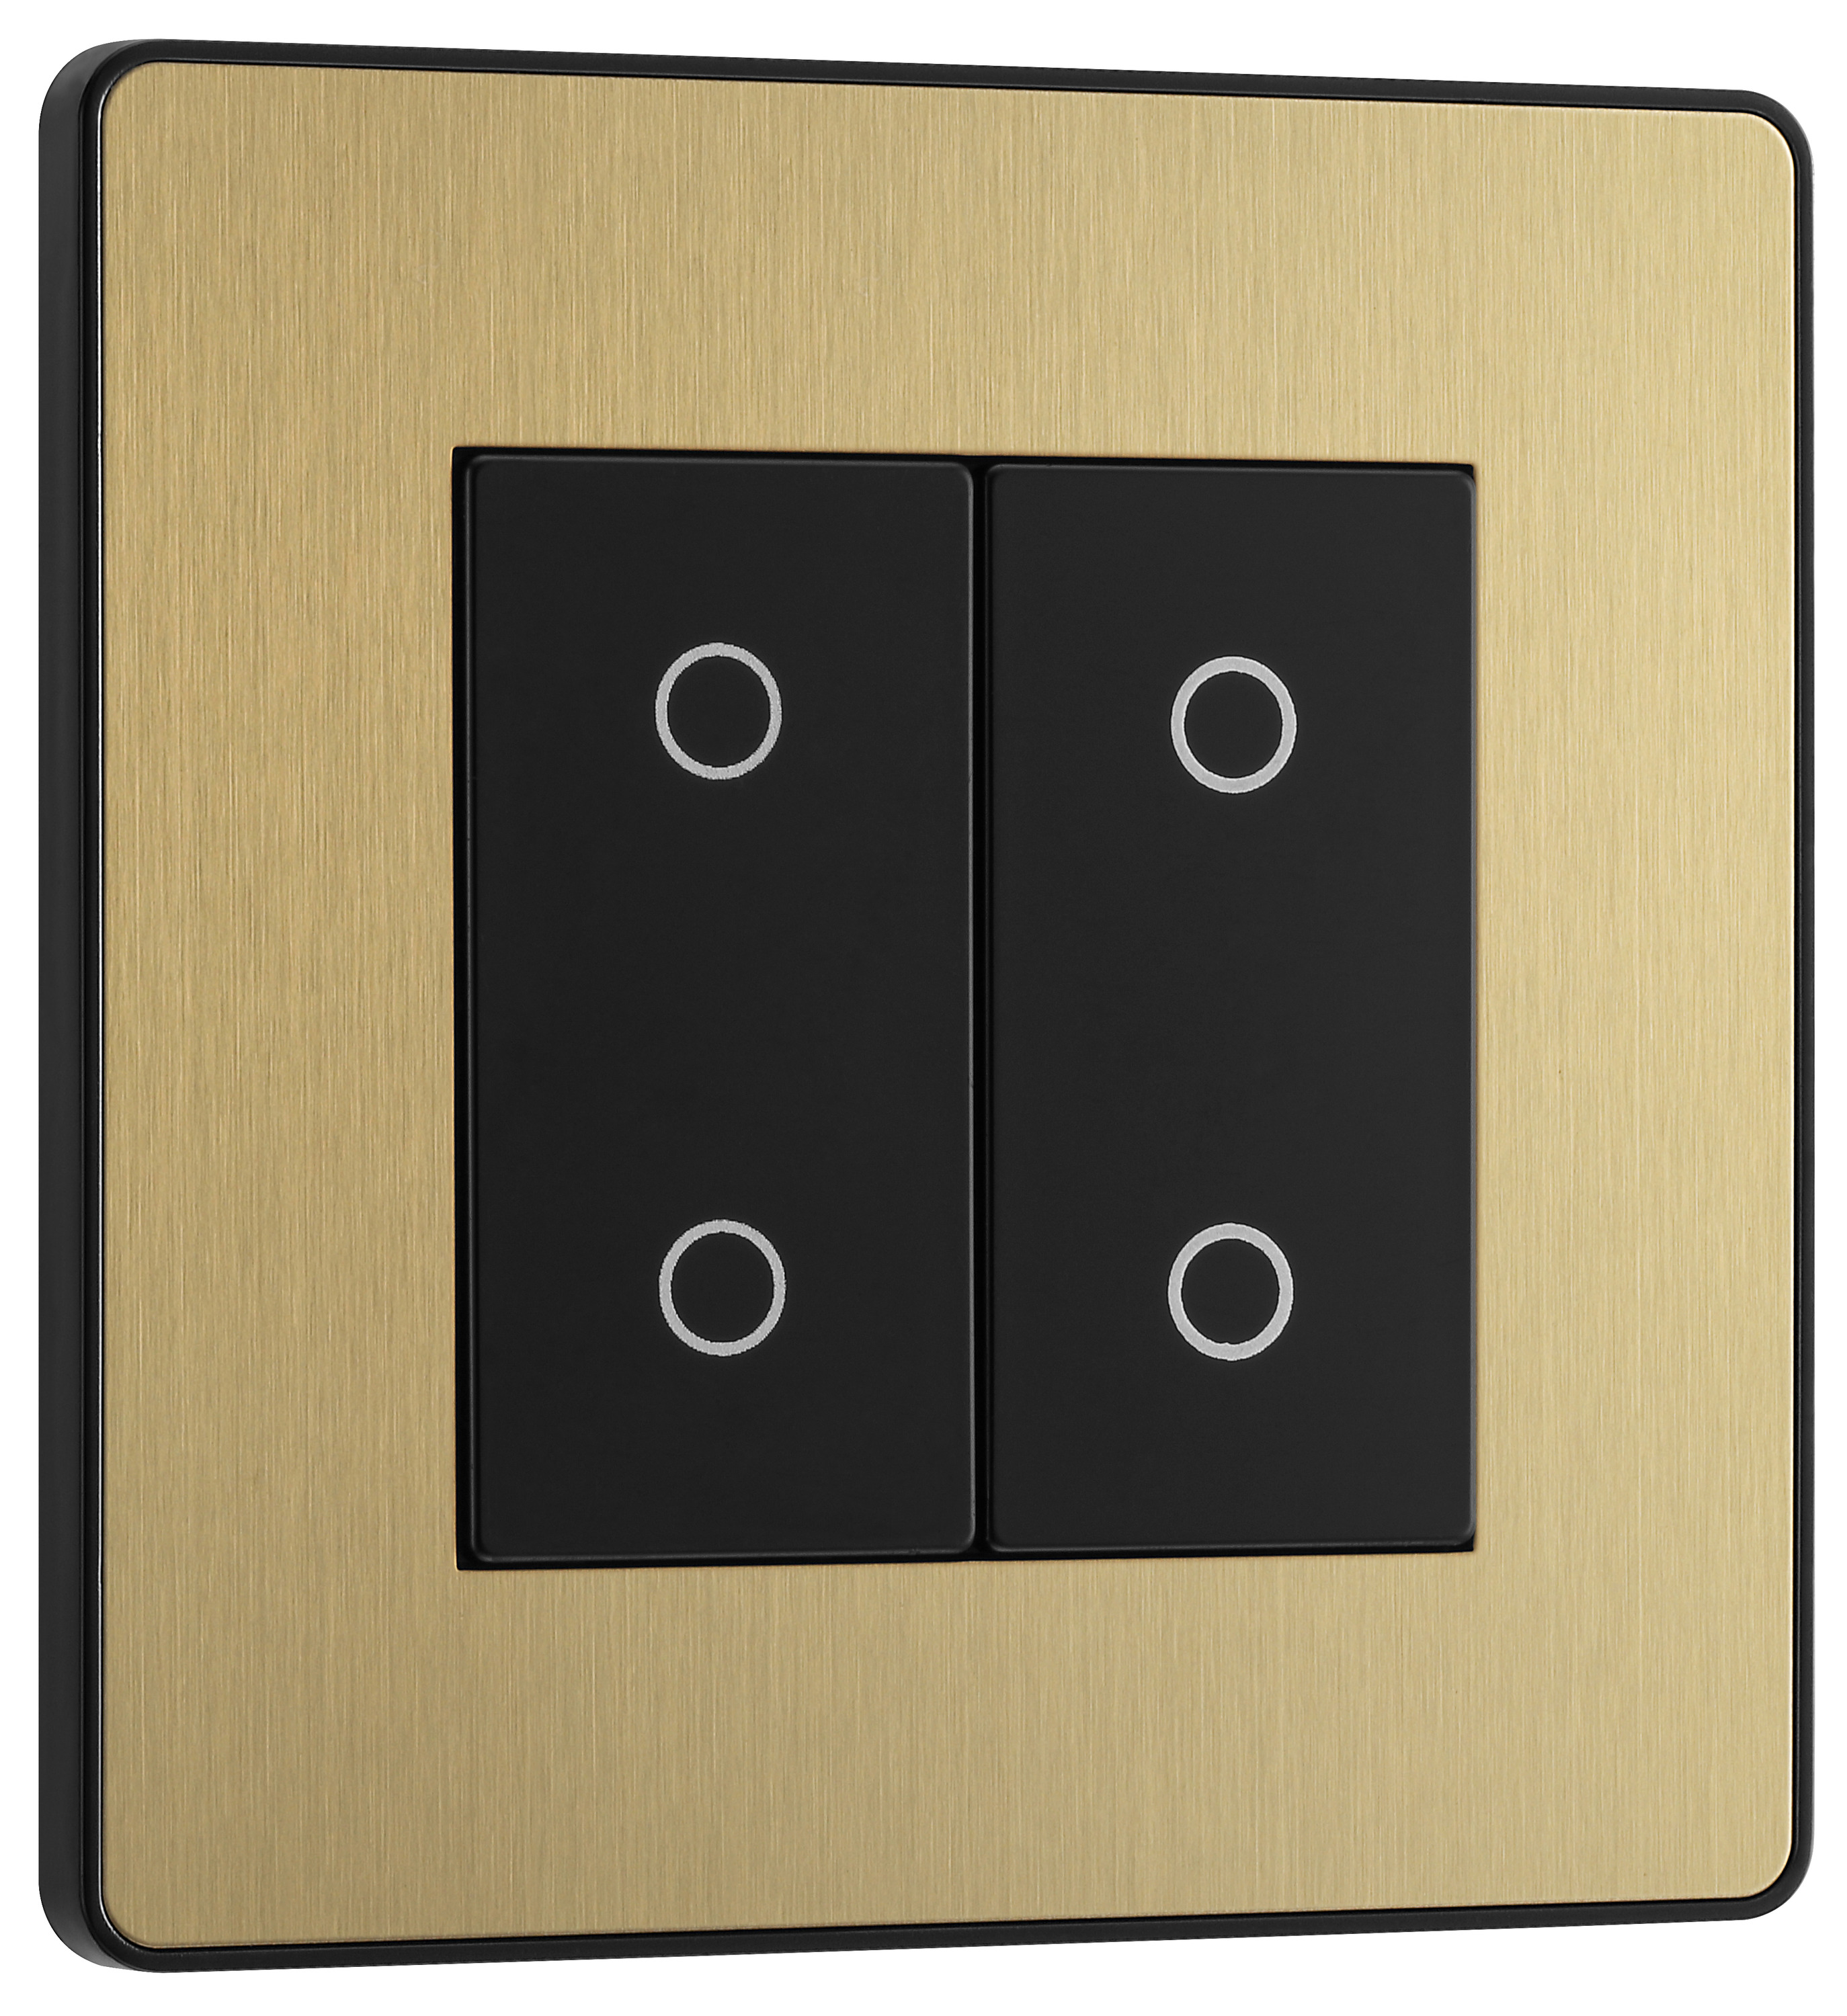 BG Evolve Secondary Brushed Brass 2 Way Double Touch Dimmer Switch - 200W